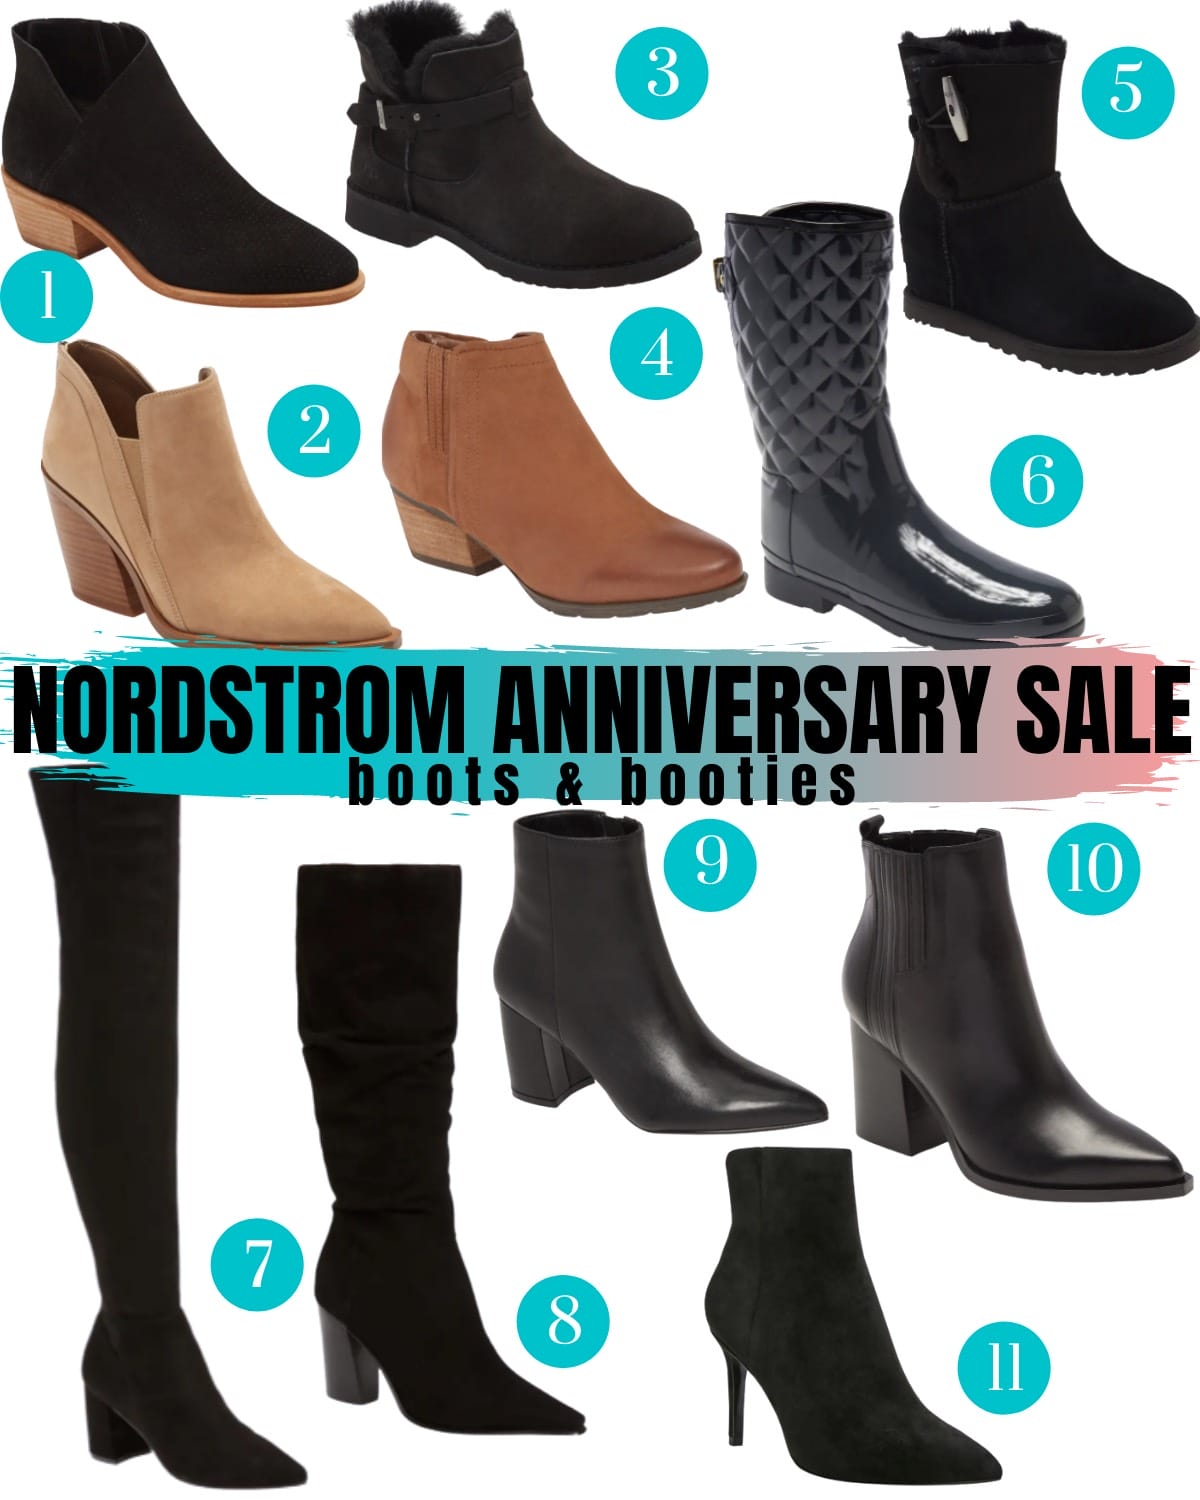 Nordstrom Anniversary Sale 2020 boots and booties